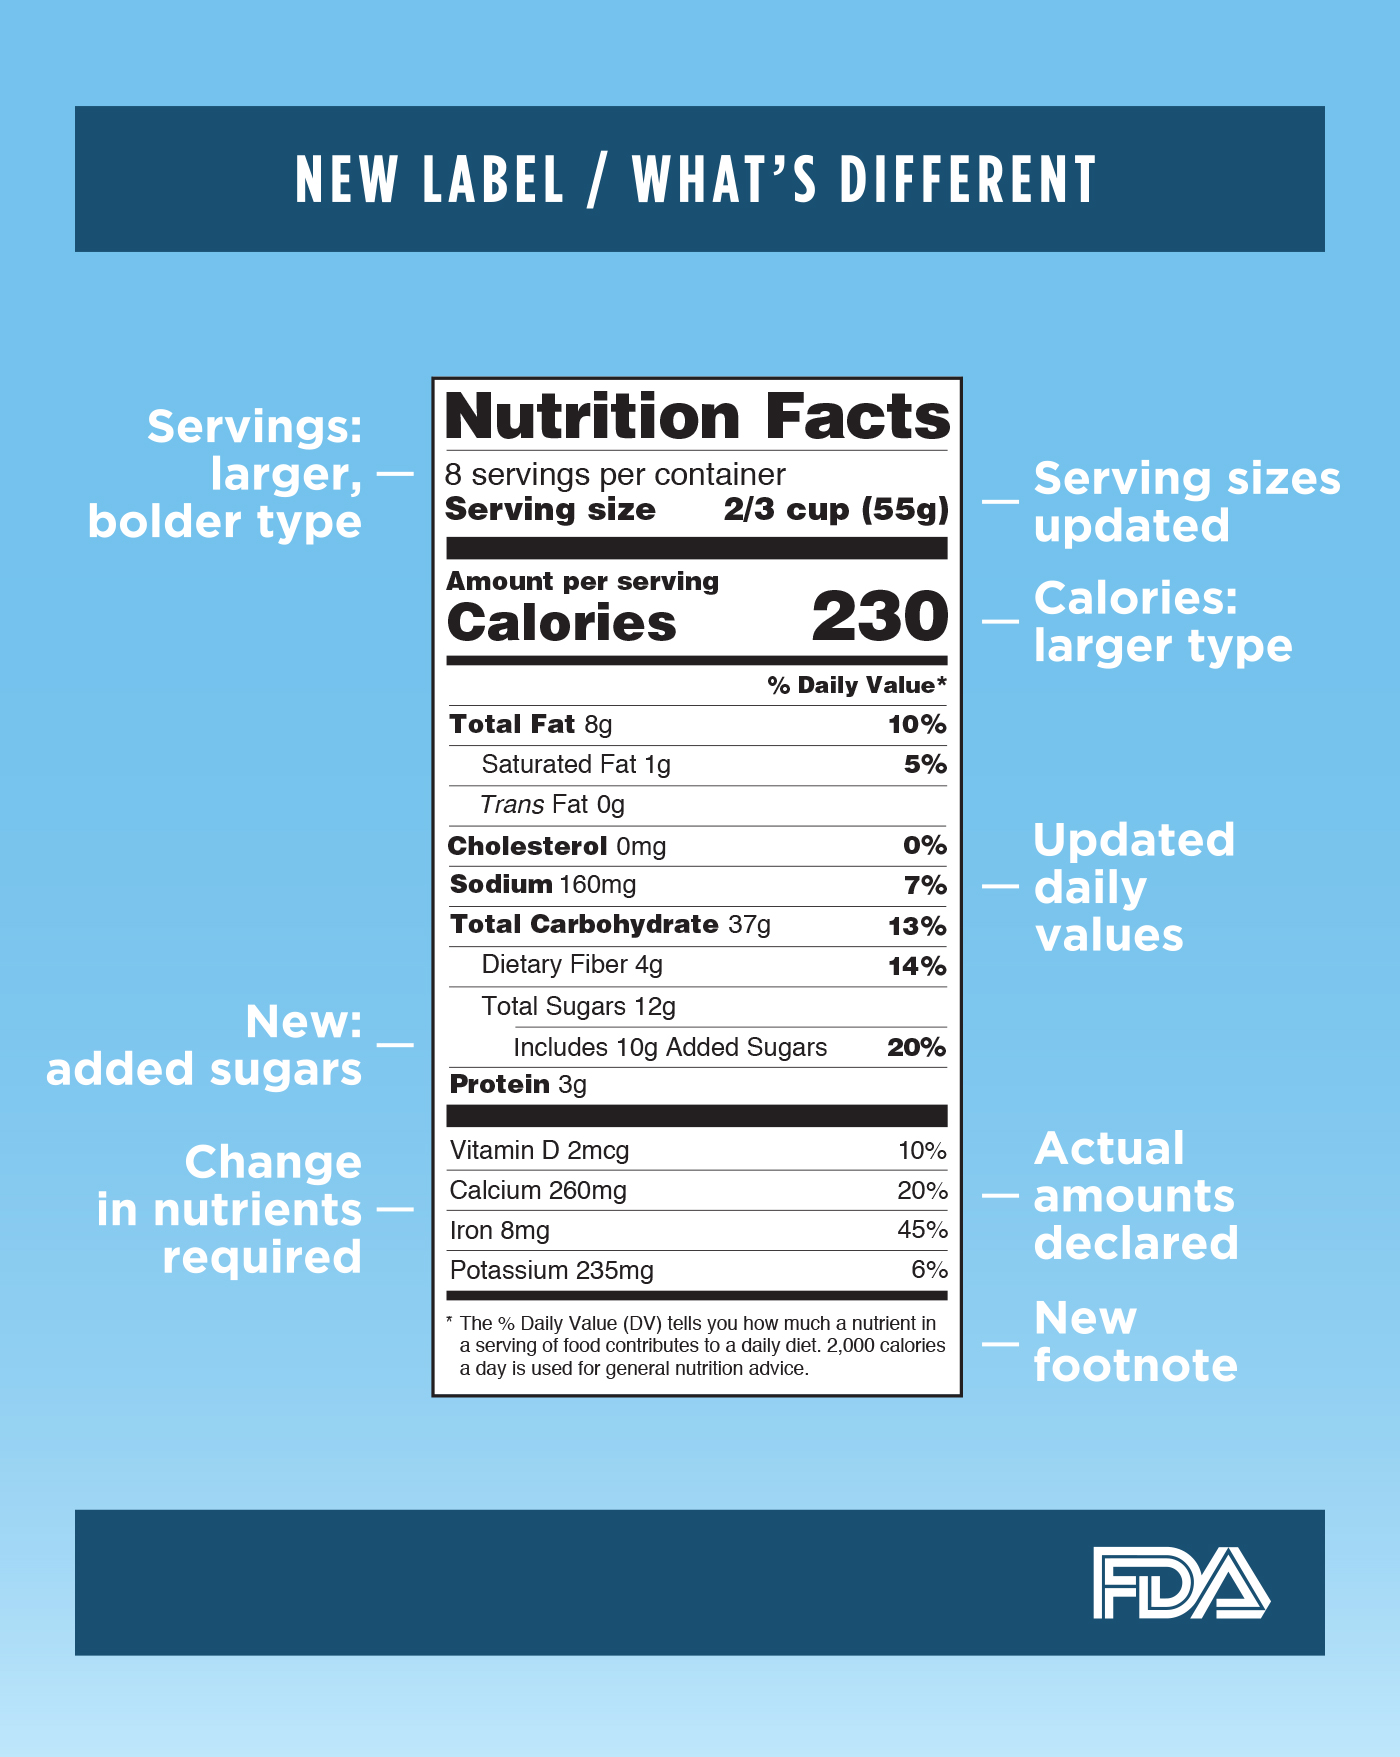 Nutrition Facts Label - What's Different